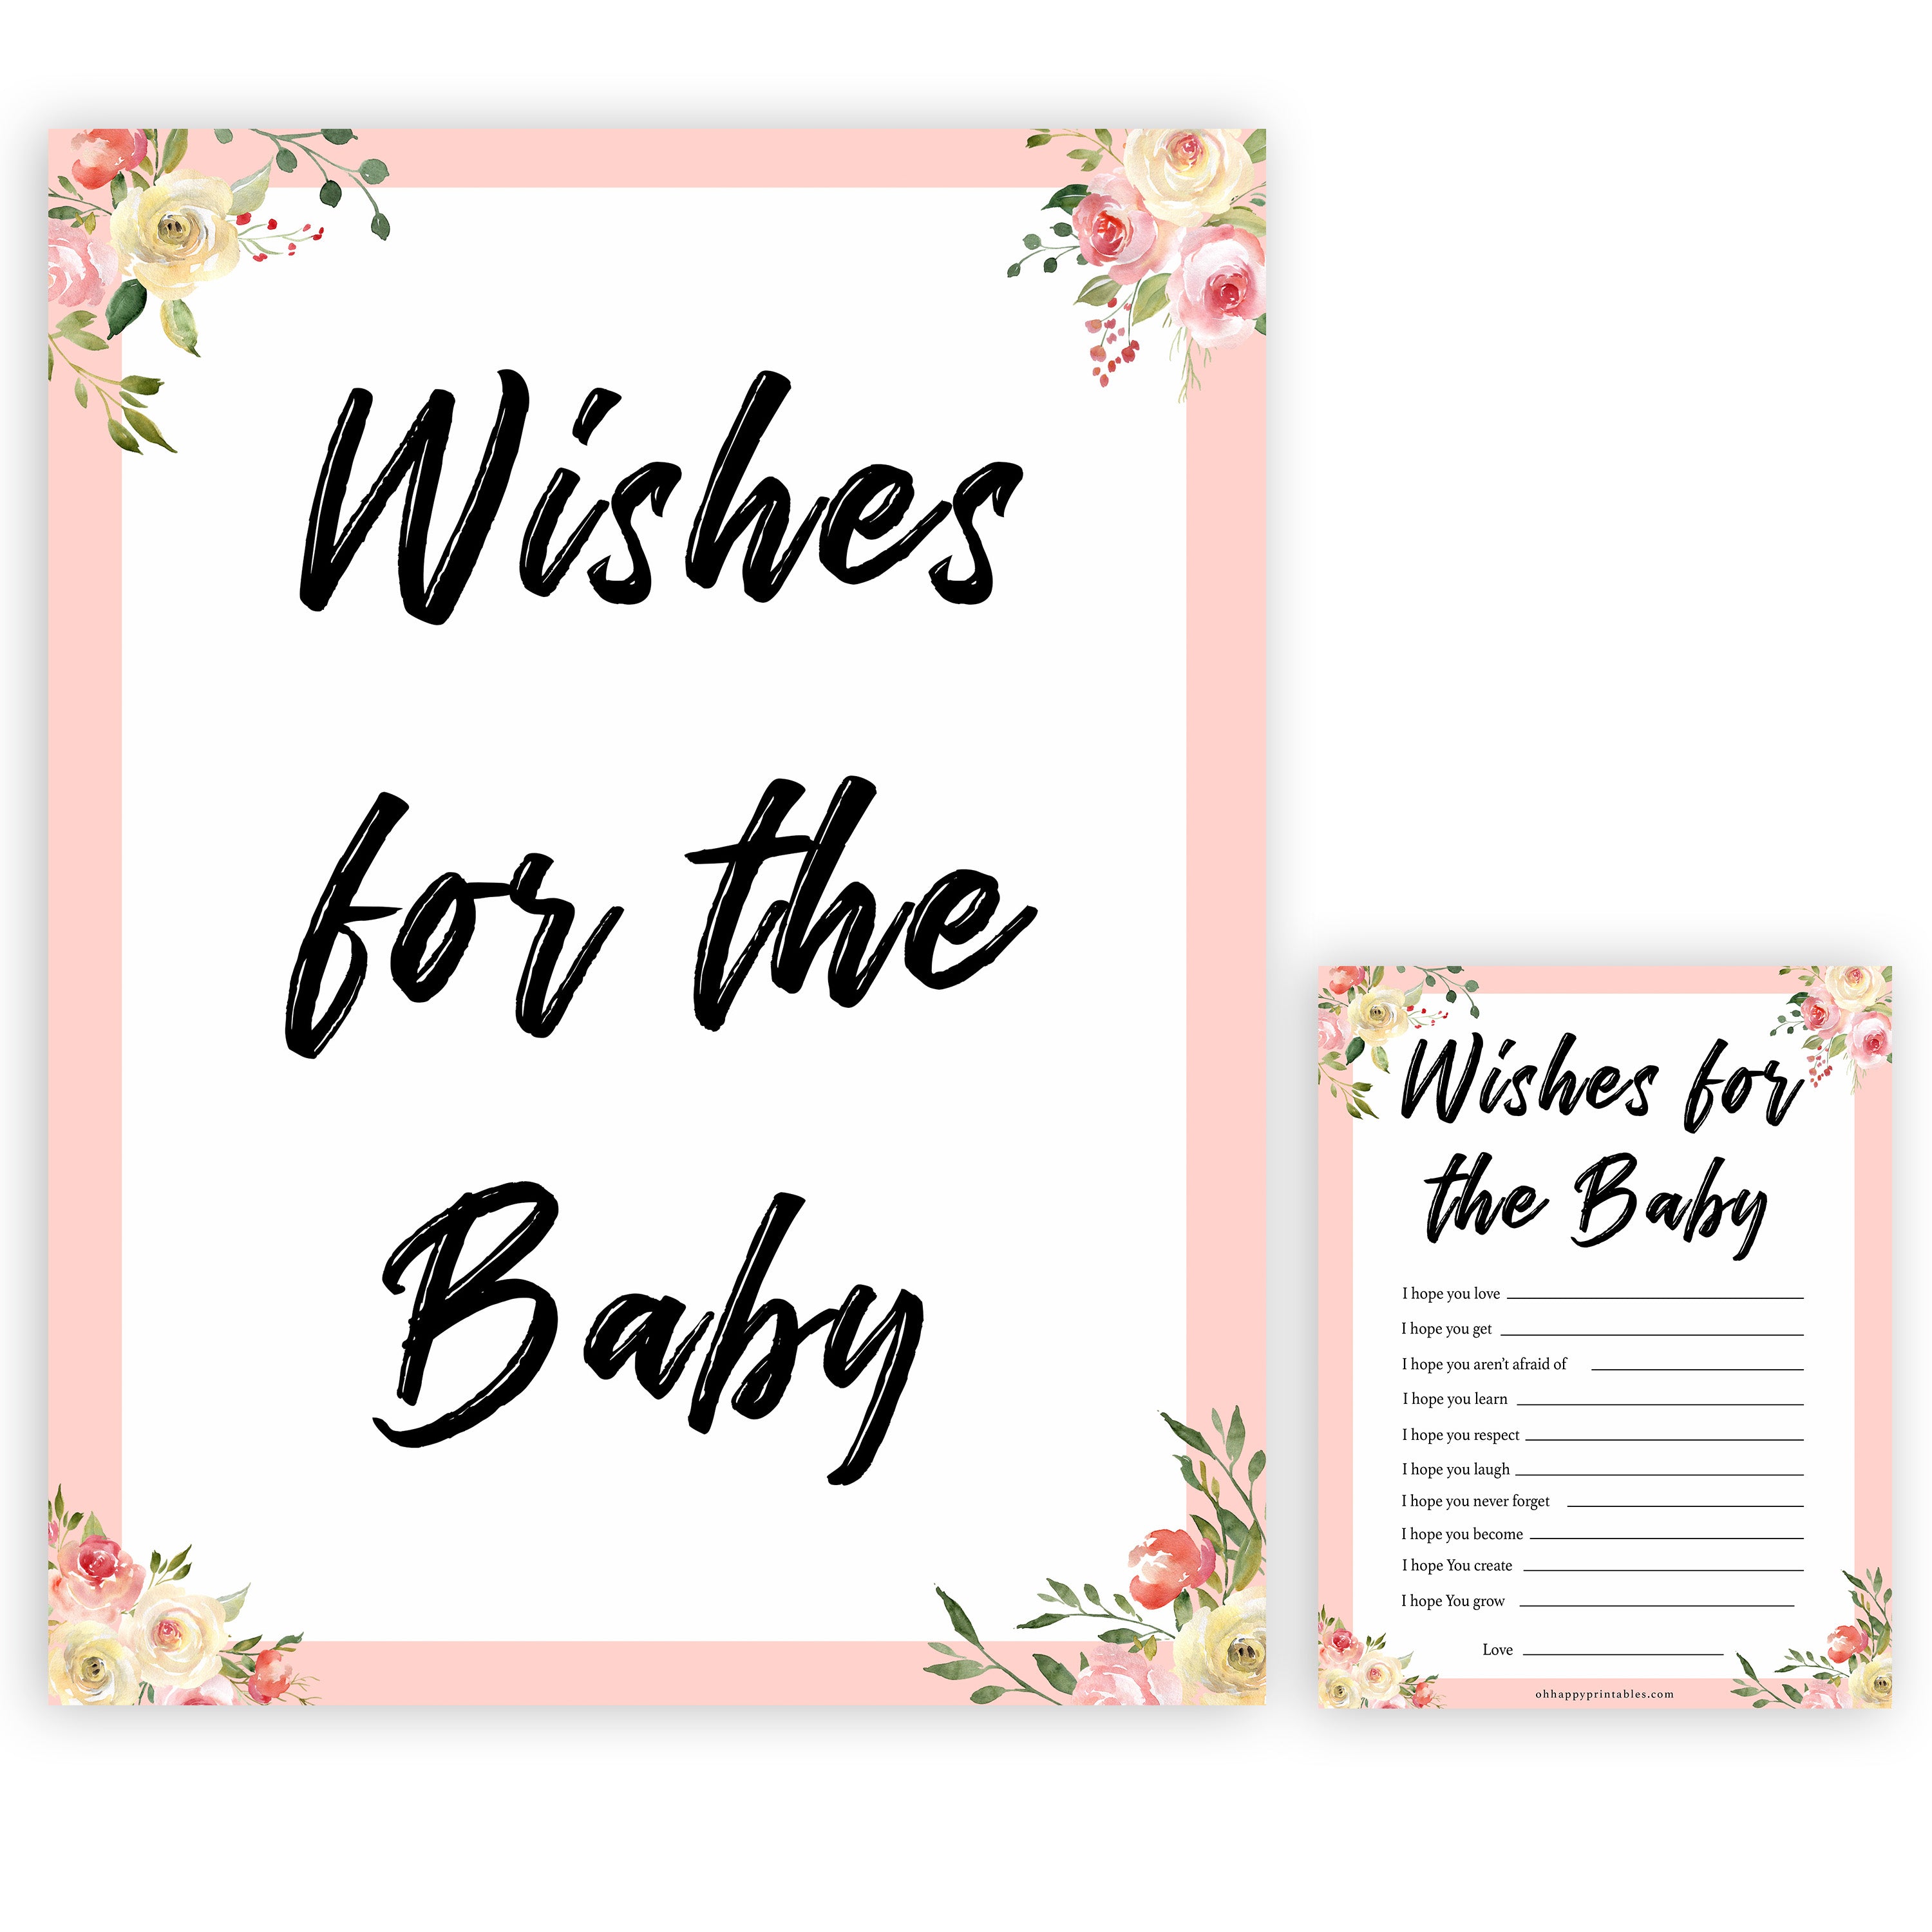 spring floral wishes for the baby baby shower games, printable baby shower games, fun baby shower games, baby shower games, popular baby shower games